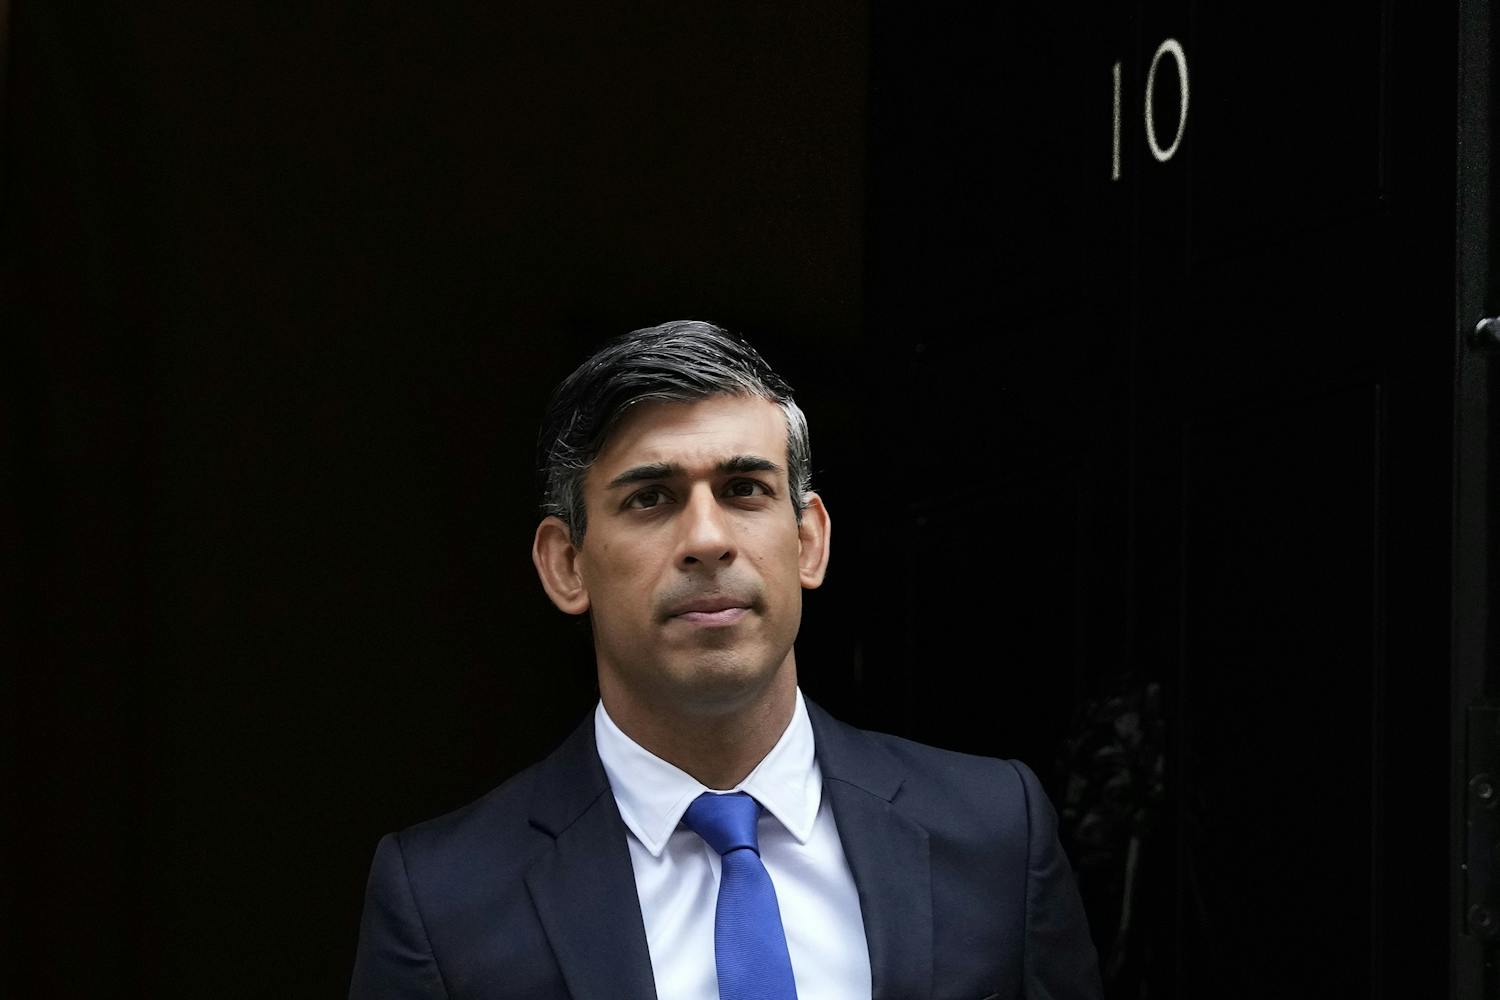 Rishi Sunak’s one year as UK Prime Minister: ‘Voters want comprehensive reform’